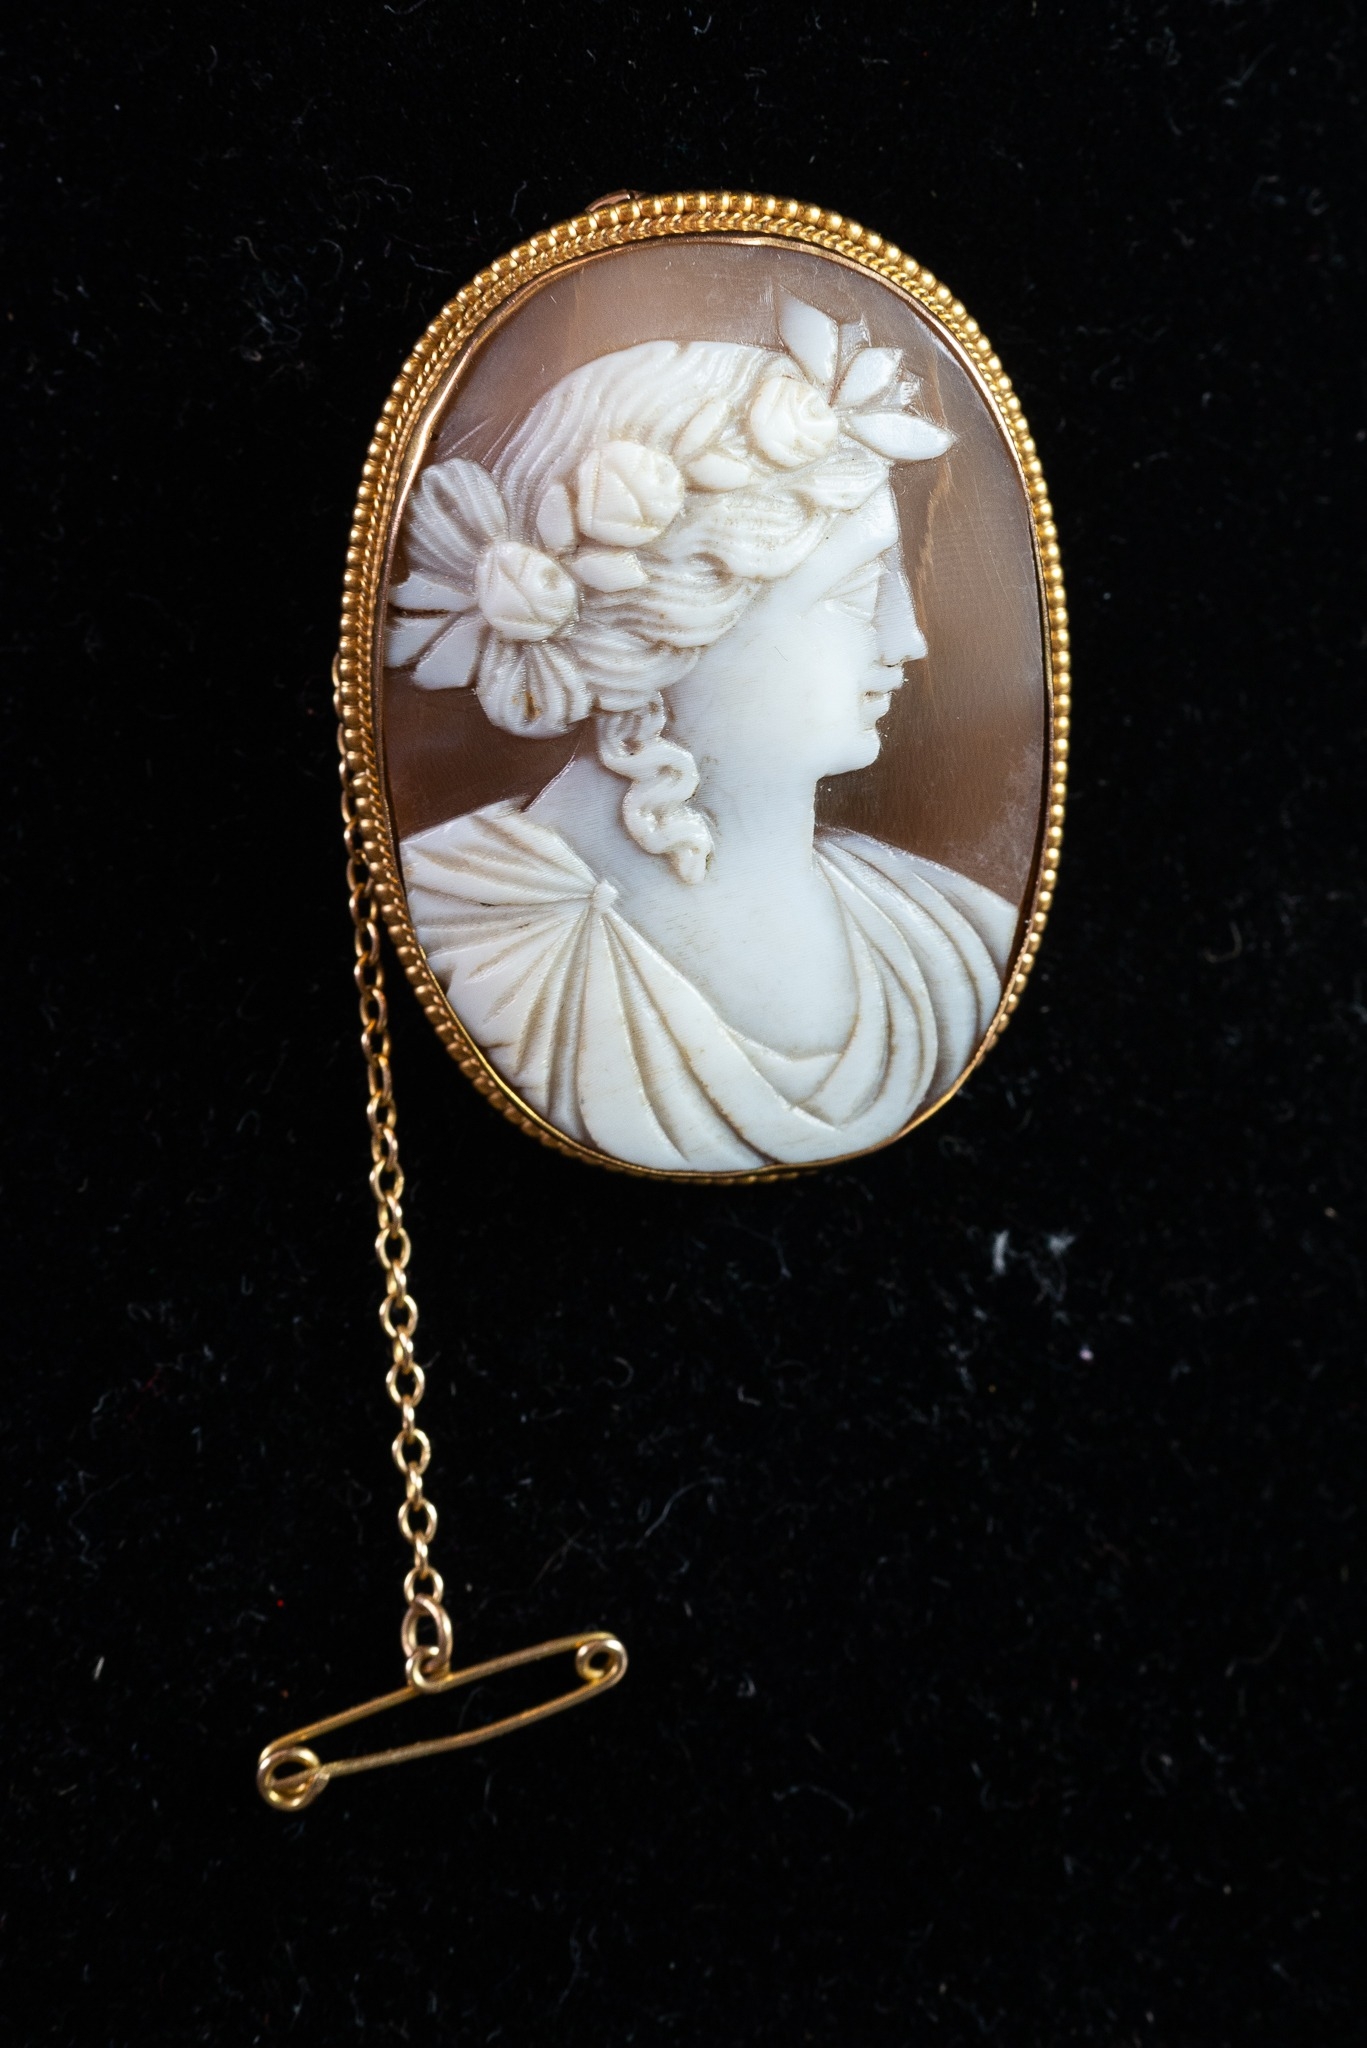 EARLT 20TH CENTURY 9ct GOLD FRAMED OVAL SHELL CAMEO BROOCH/PENDANT well carved with a classical